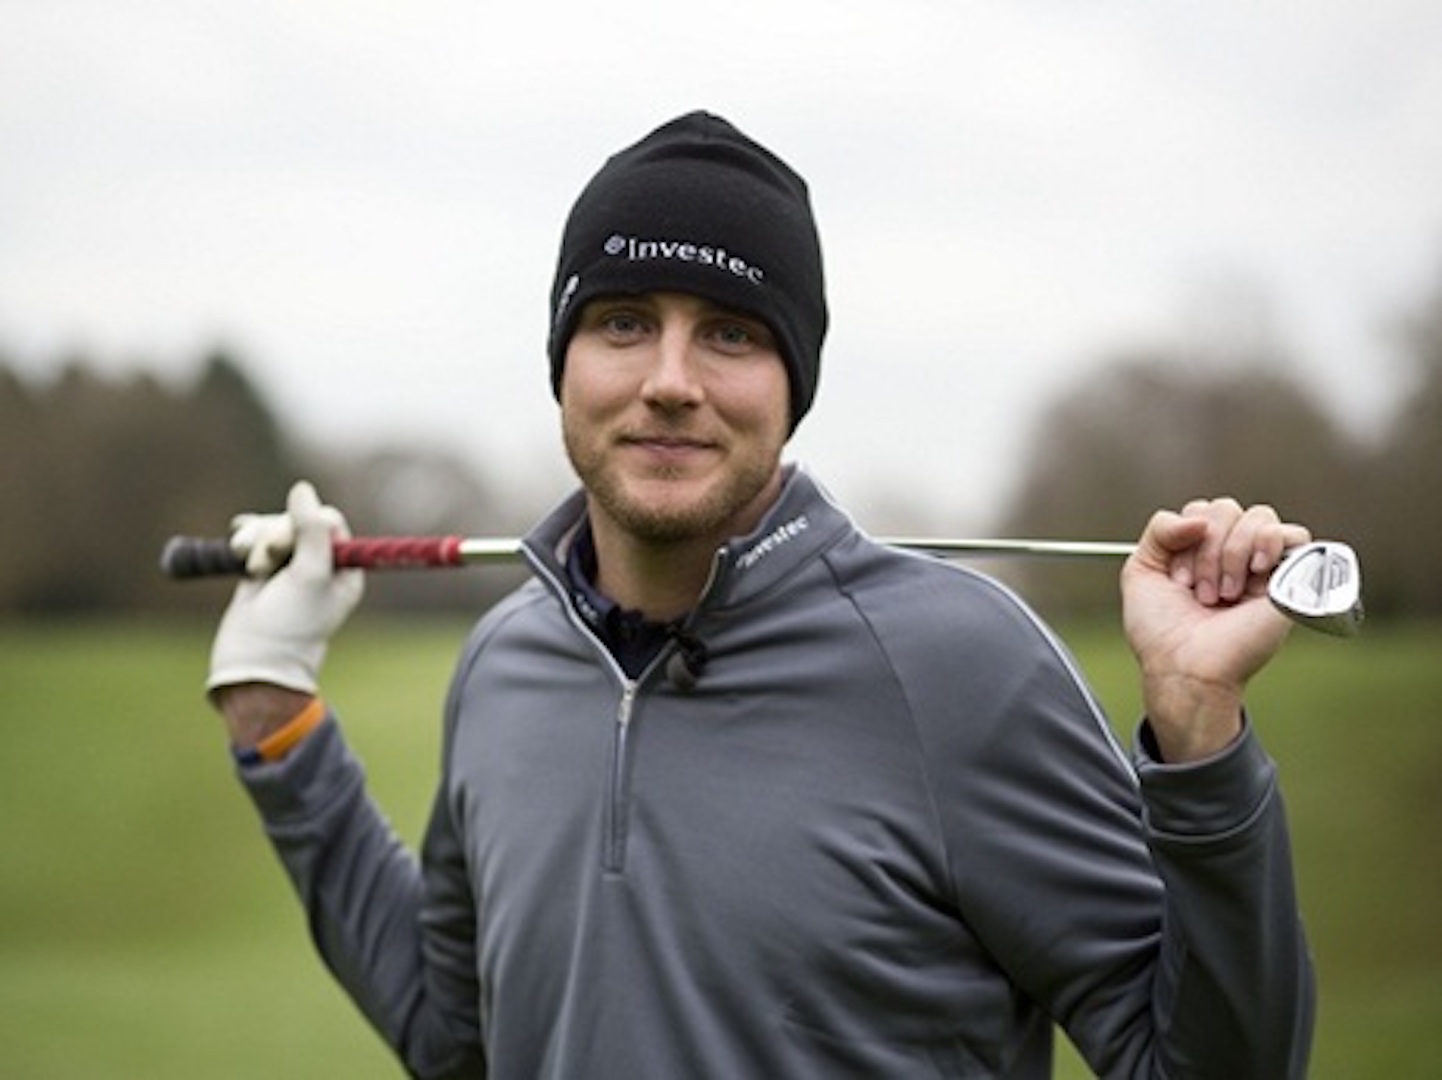 England cricketer Stuart Broad injured by golf ball in Australia